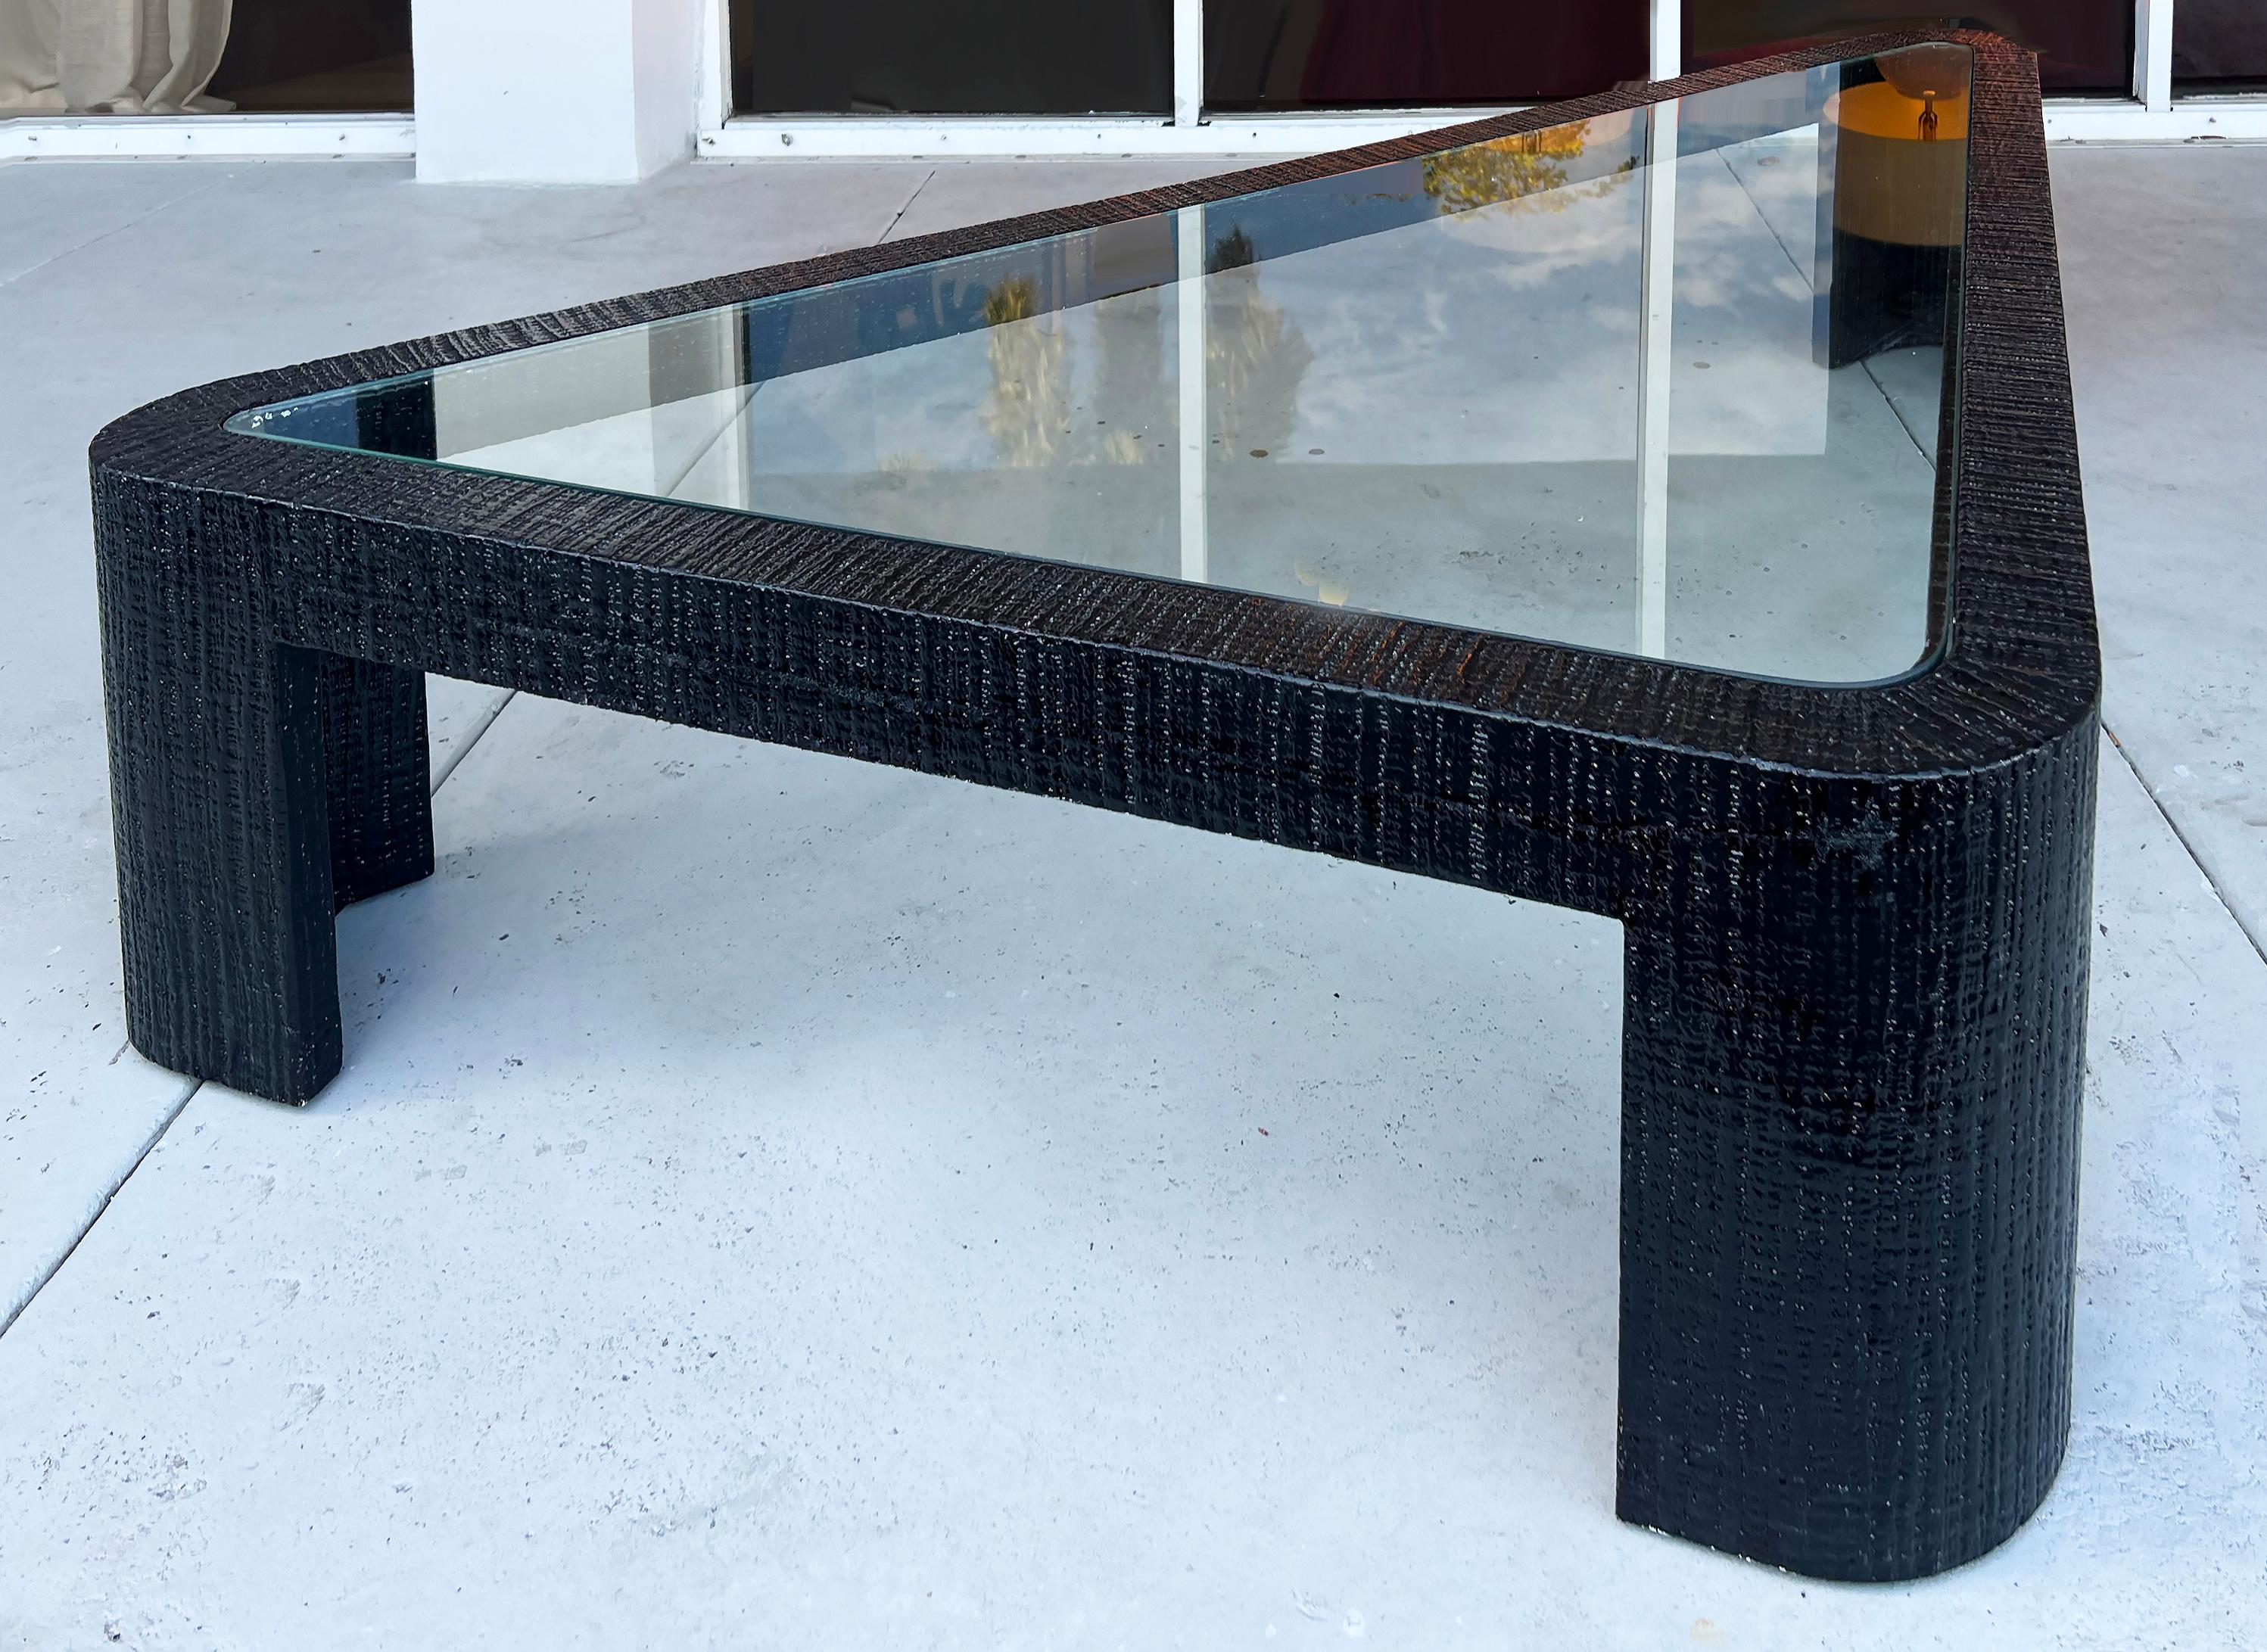 




Monumental Vintage Triangular Coffee Table, Ron Seff attributed

Offered for sale is a monumental coffee table shaped like an extended triangle attributed to Ron Seff. The table is clad in a textured finish indicative of painted grass-cloth.